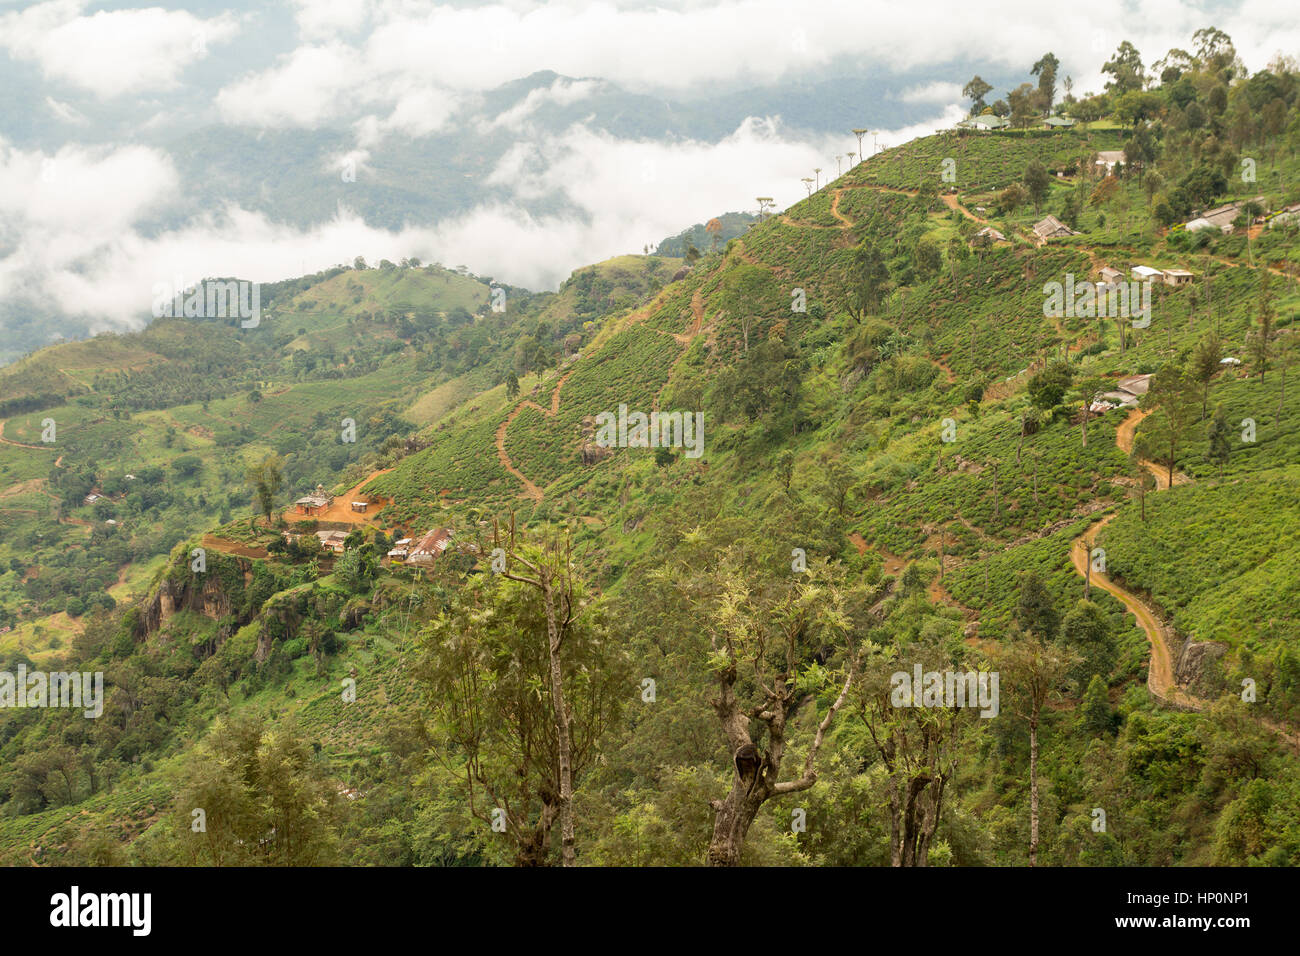 hill countryside with tea plantations Stock Photo